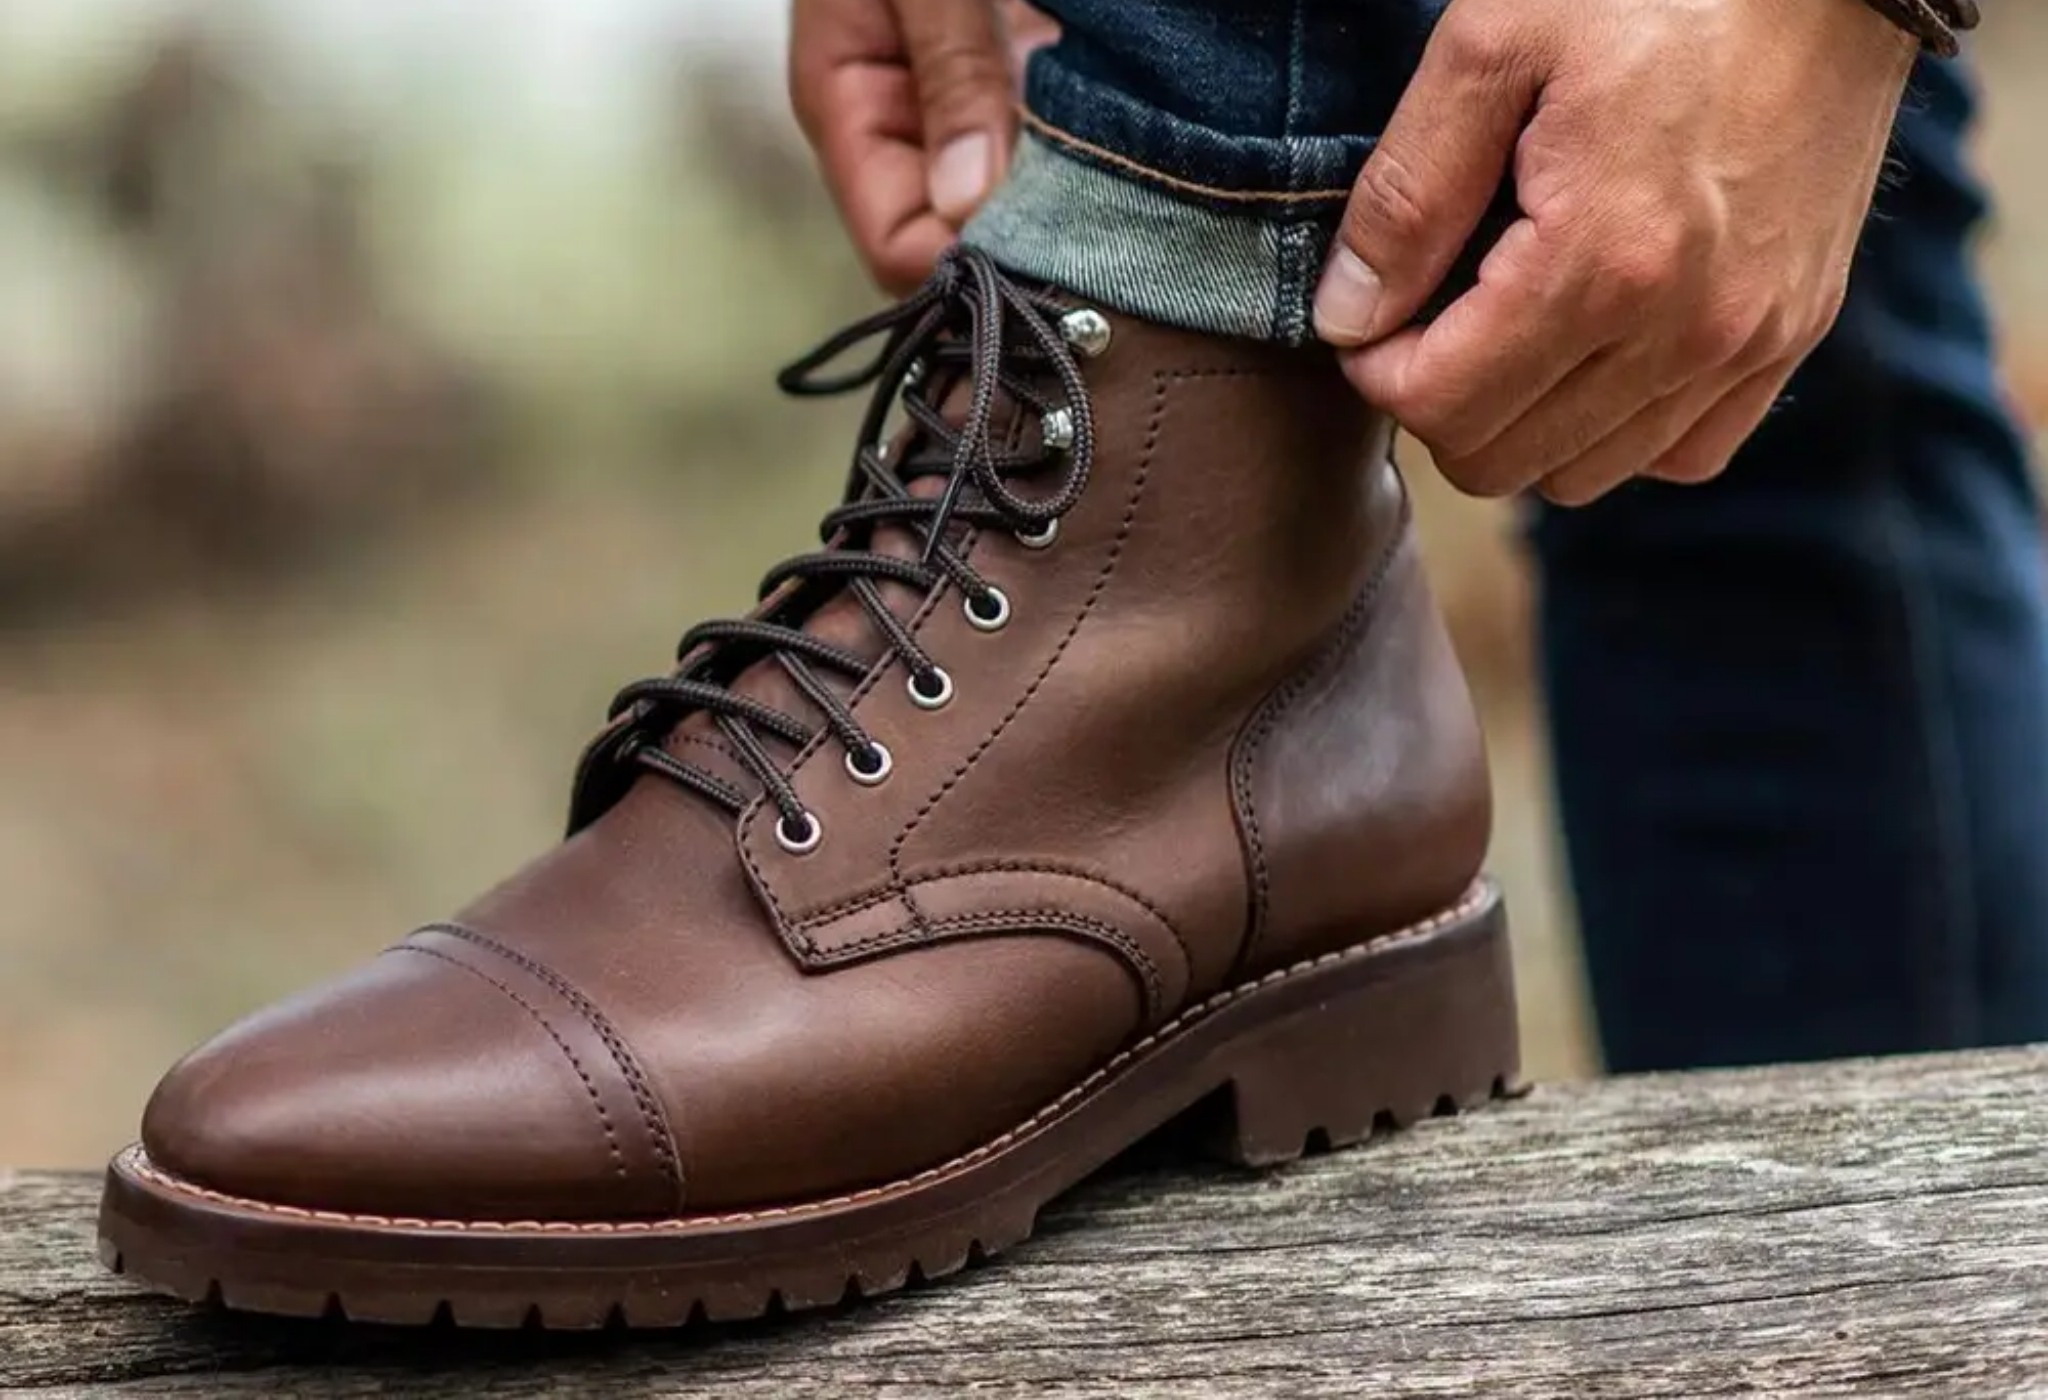 Is View the Internet article How To Clean & Condition Leather Boots | Ultimate Guide To Boot Care